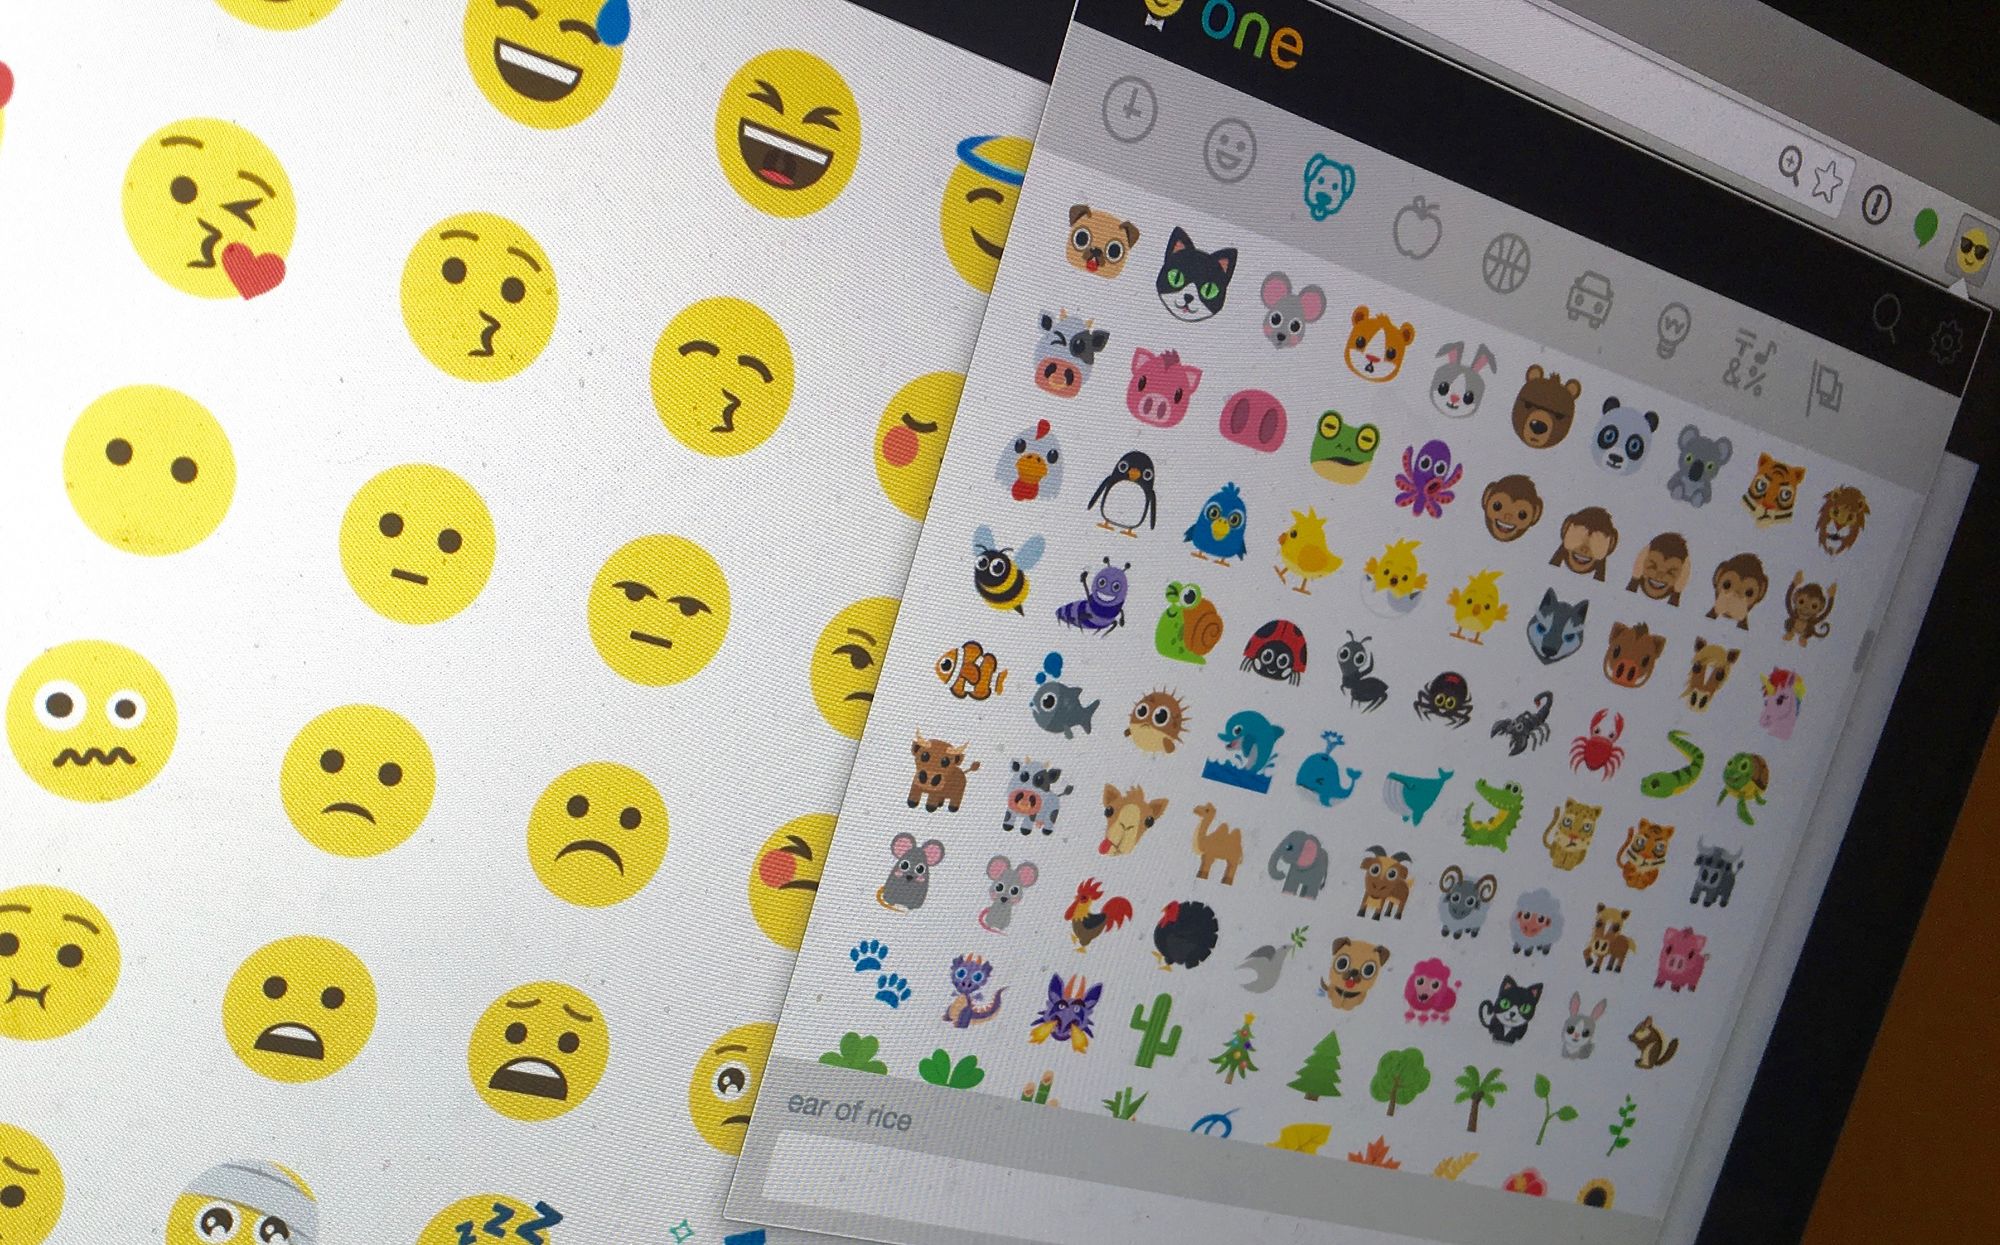 Emoji One for Chrome released